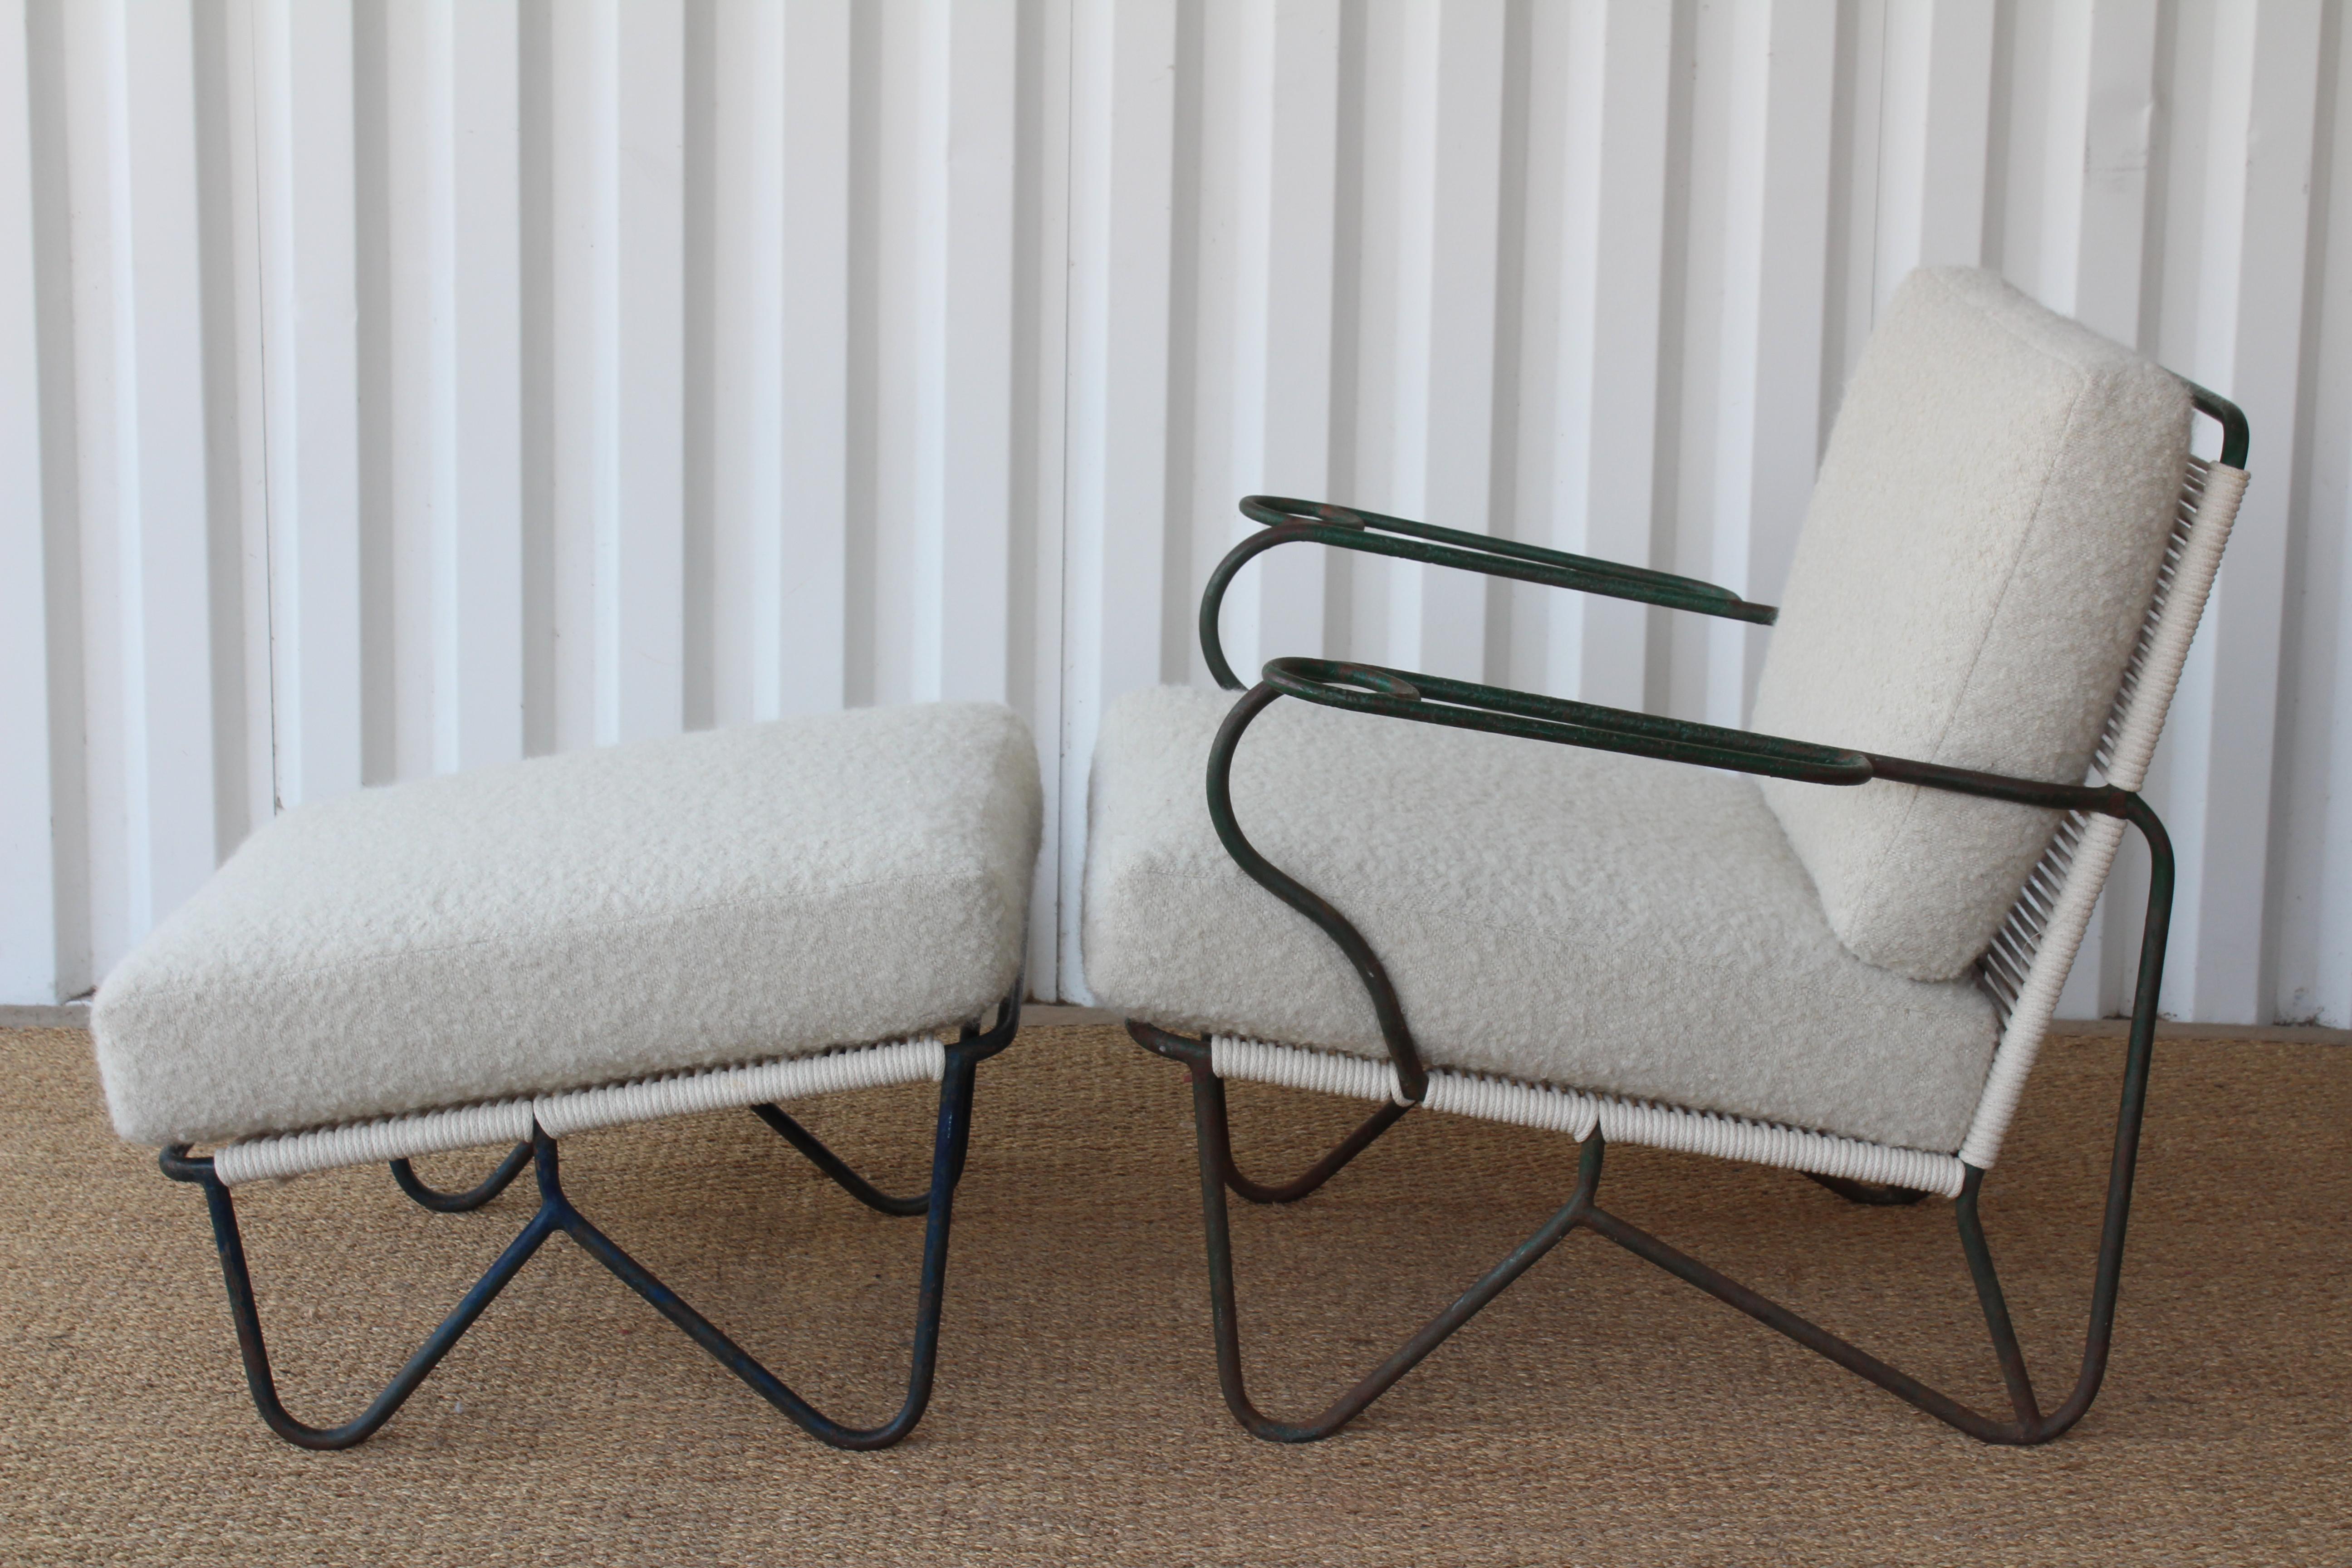 Vintage 1950s iron framed lounge chair and ottoman, in the manner of Walter Lamb. Comepletely restored with new woven rope on both pieces. New alpaca wool boucle cushions. The chair is in it's orignal green enamel finish. The ottoman is in it's